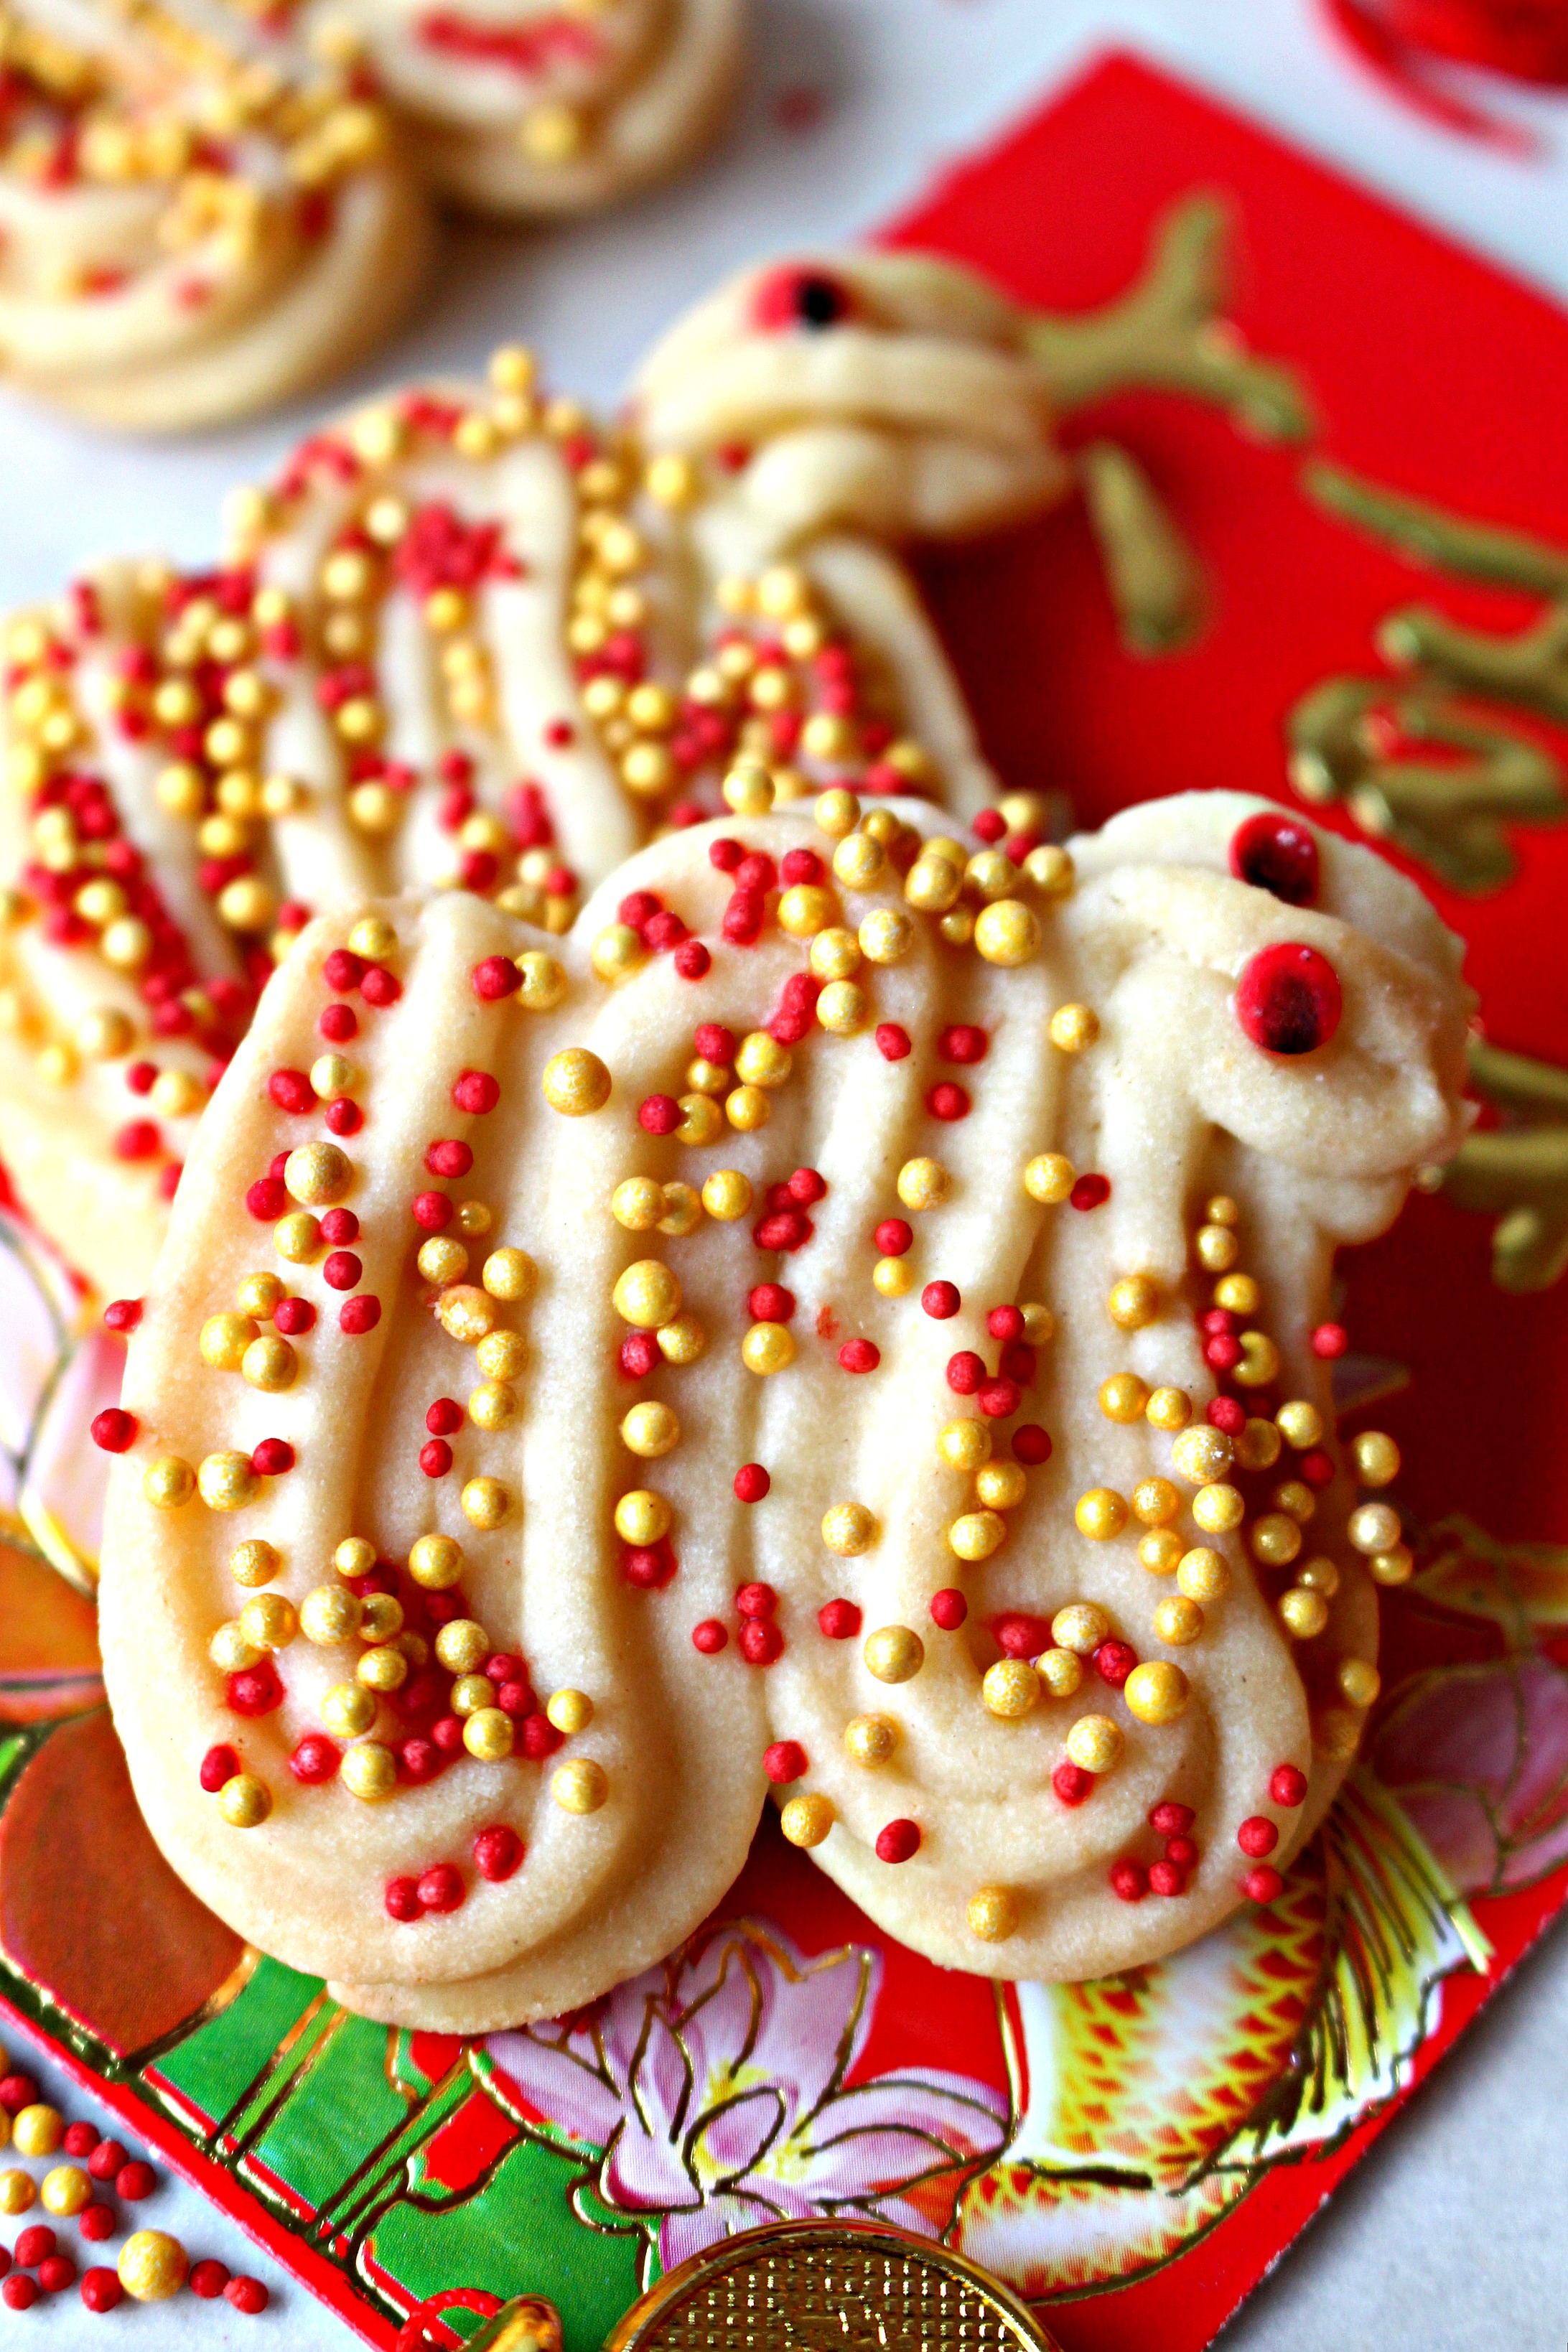 Butter Cookie Dragons made with piped butter cookie and sprinkled in red and gold.